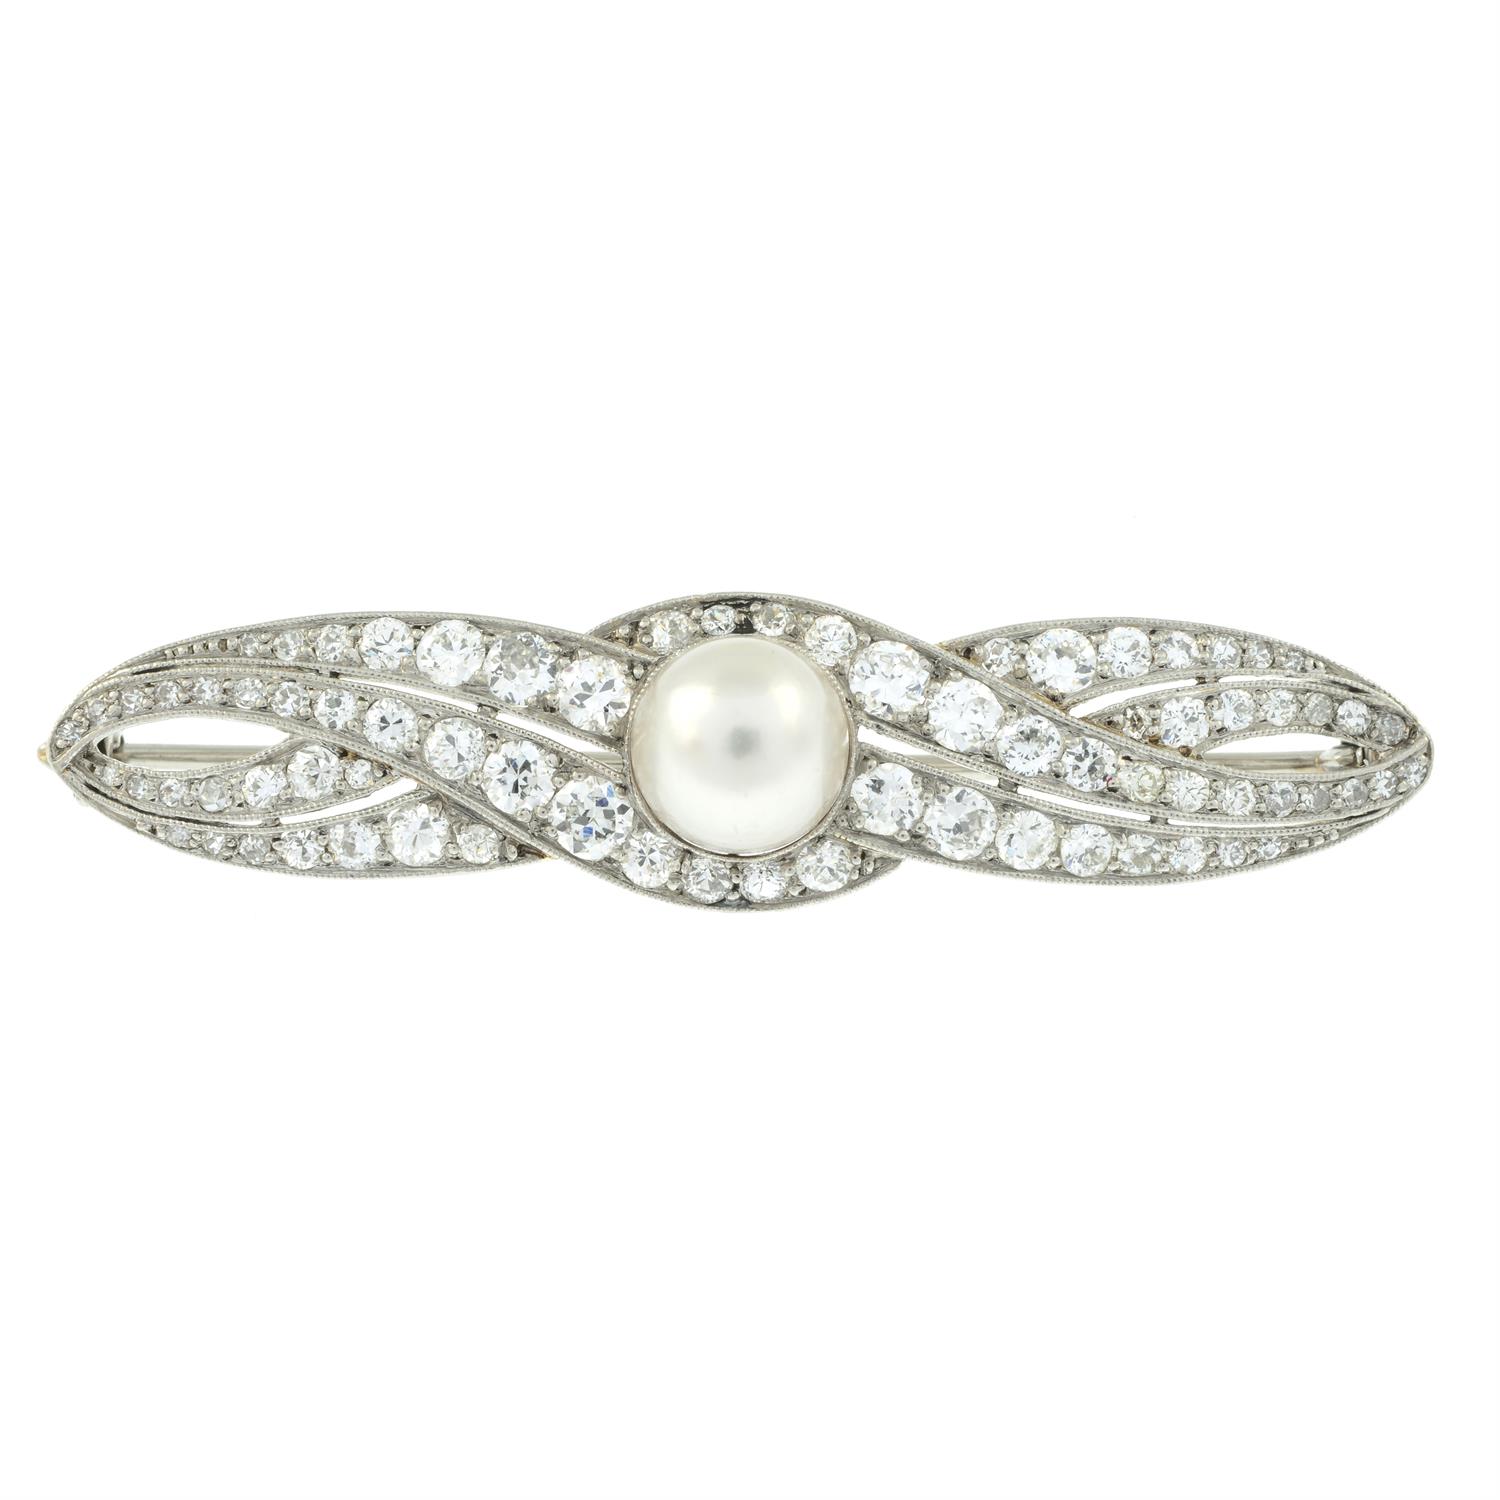 An early 20th century platinum natural pearl and circular-cut diamond brooch. - Image 2 of 4